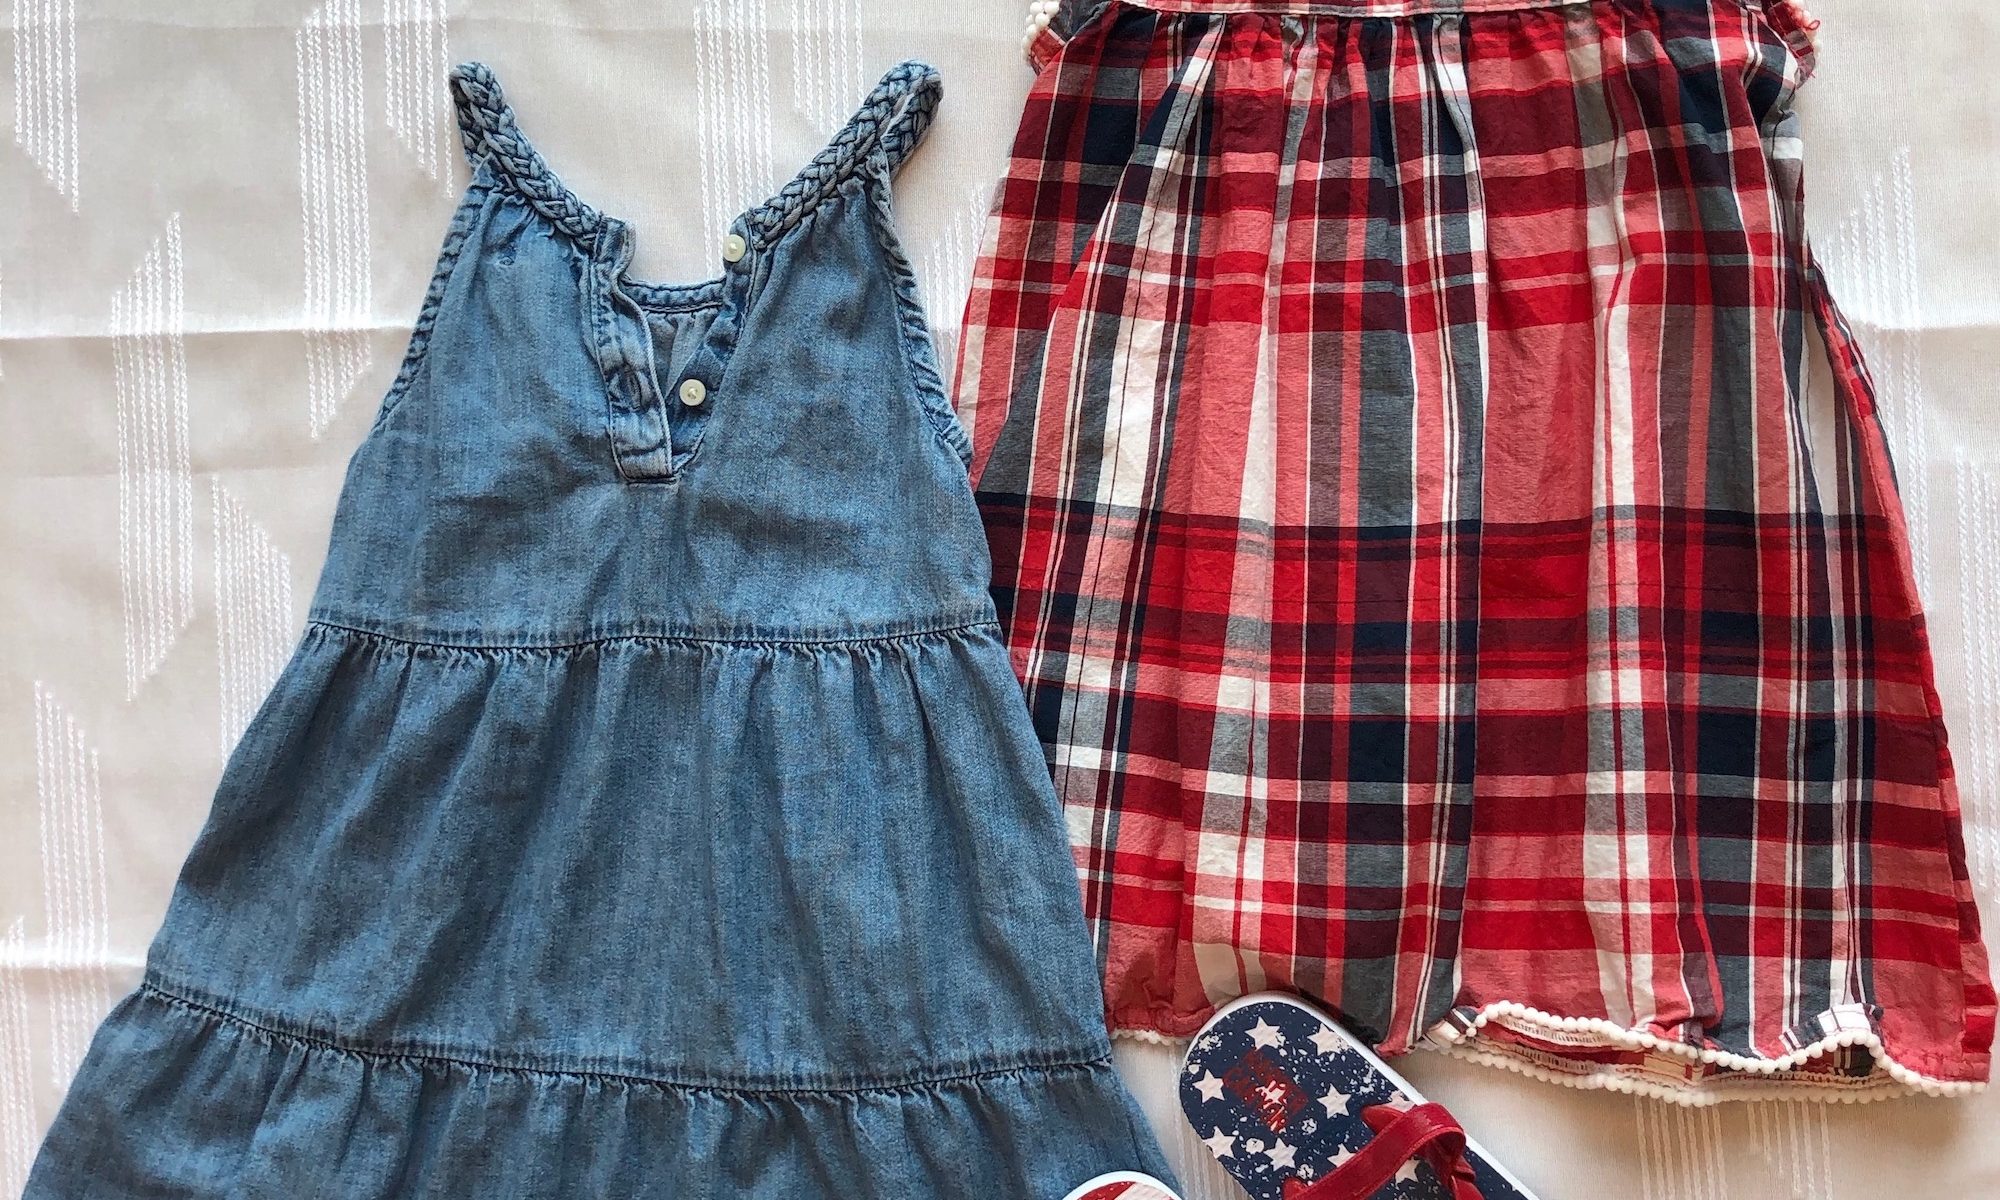 Girls' sleeveless dress and shoes with stripes and stars